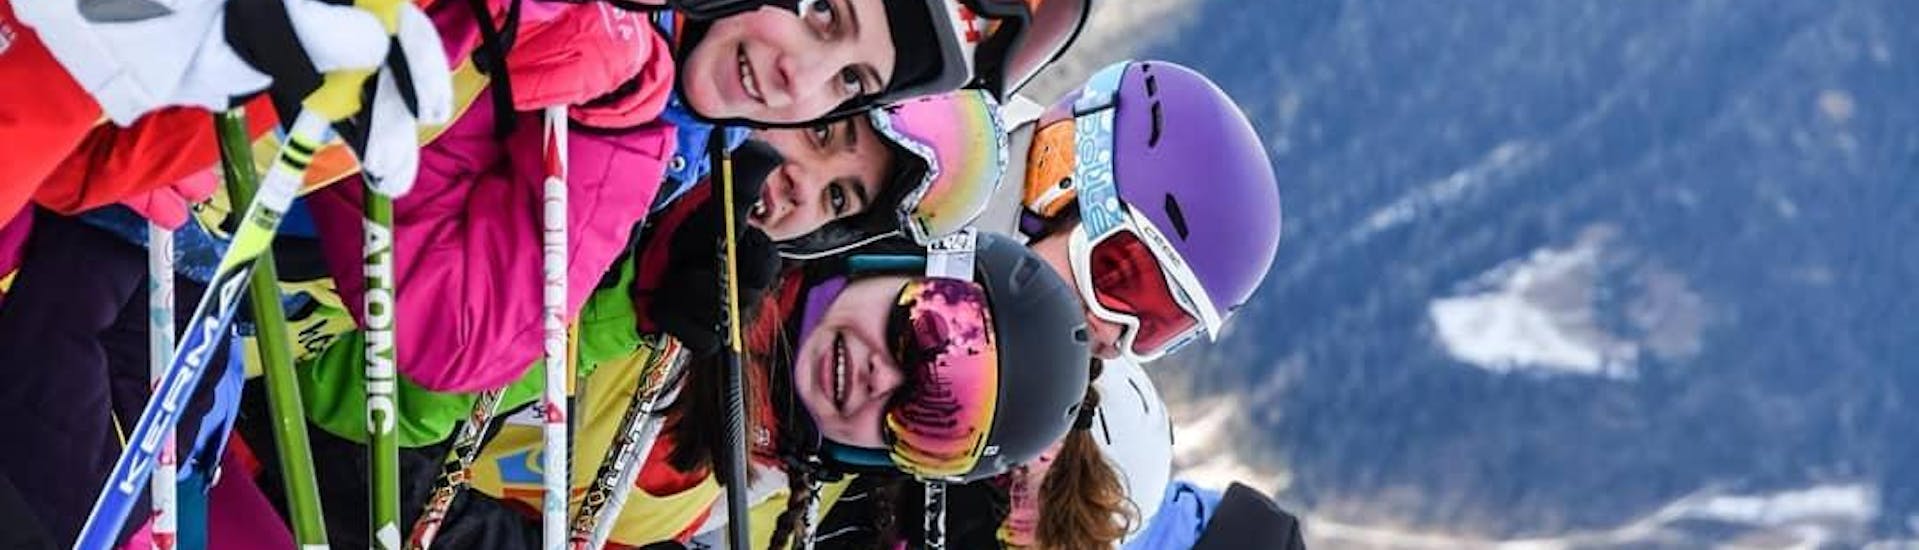 Kids Ski Lessons (4-12 y.) for Experienced Skiers